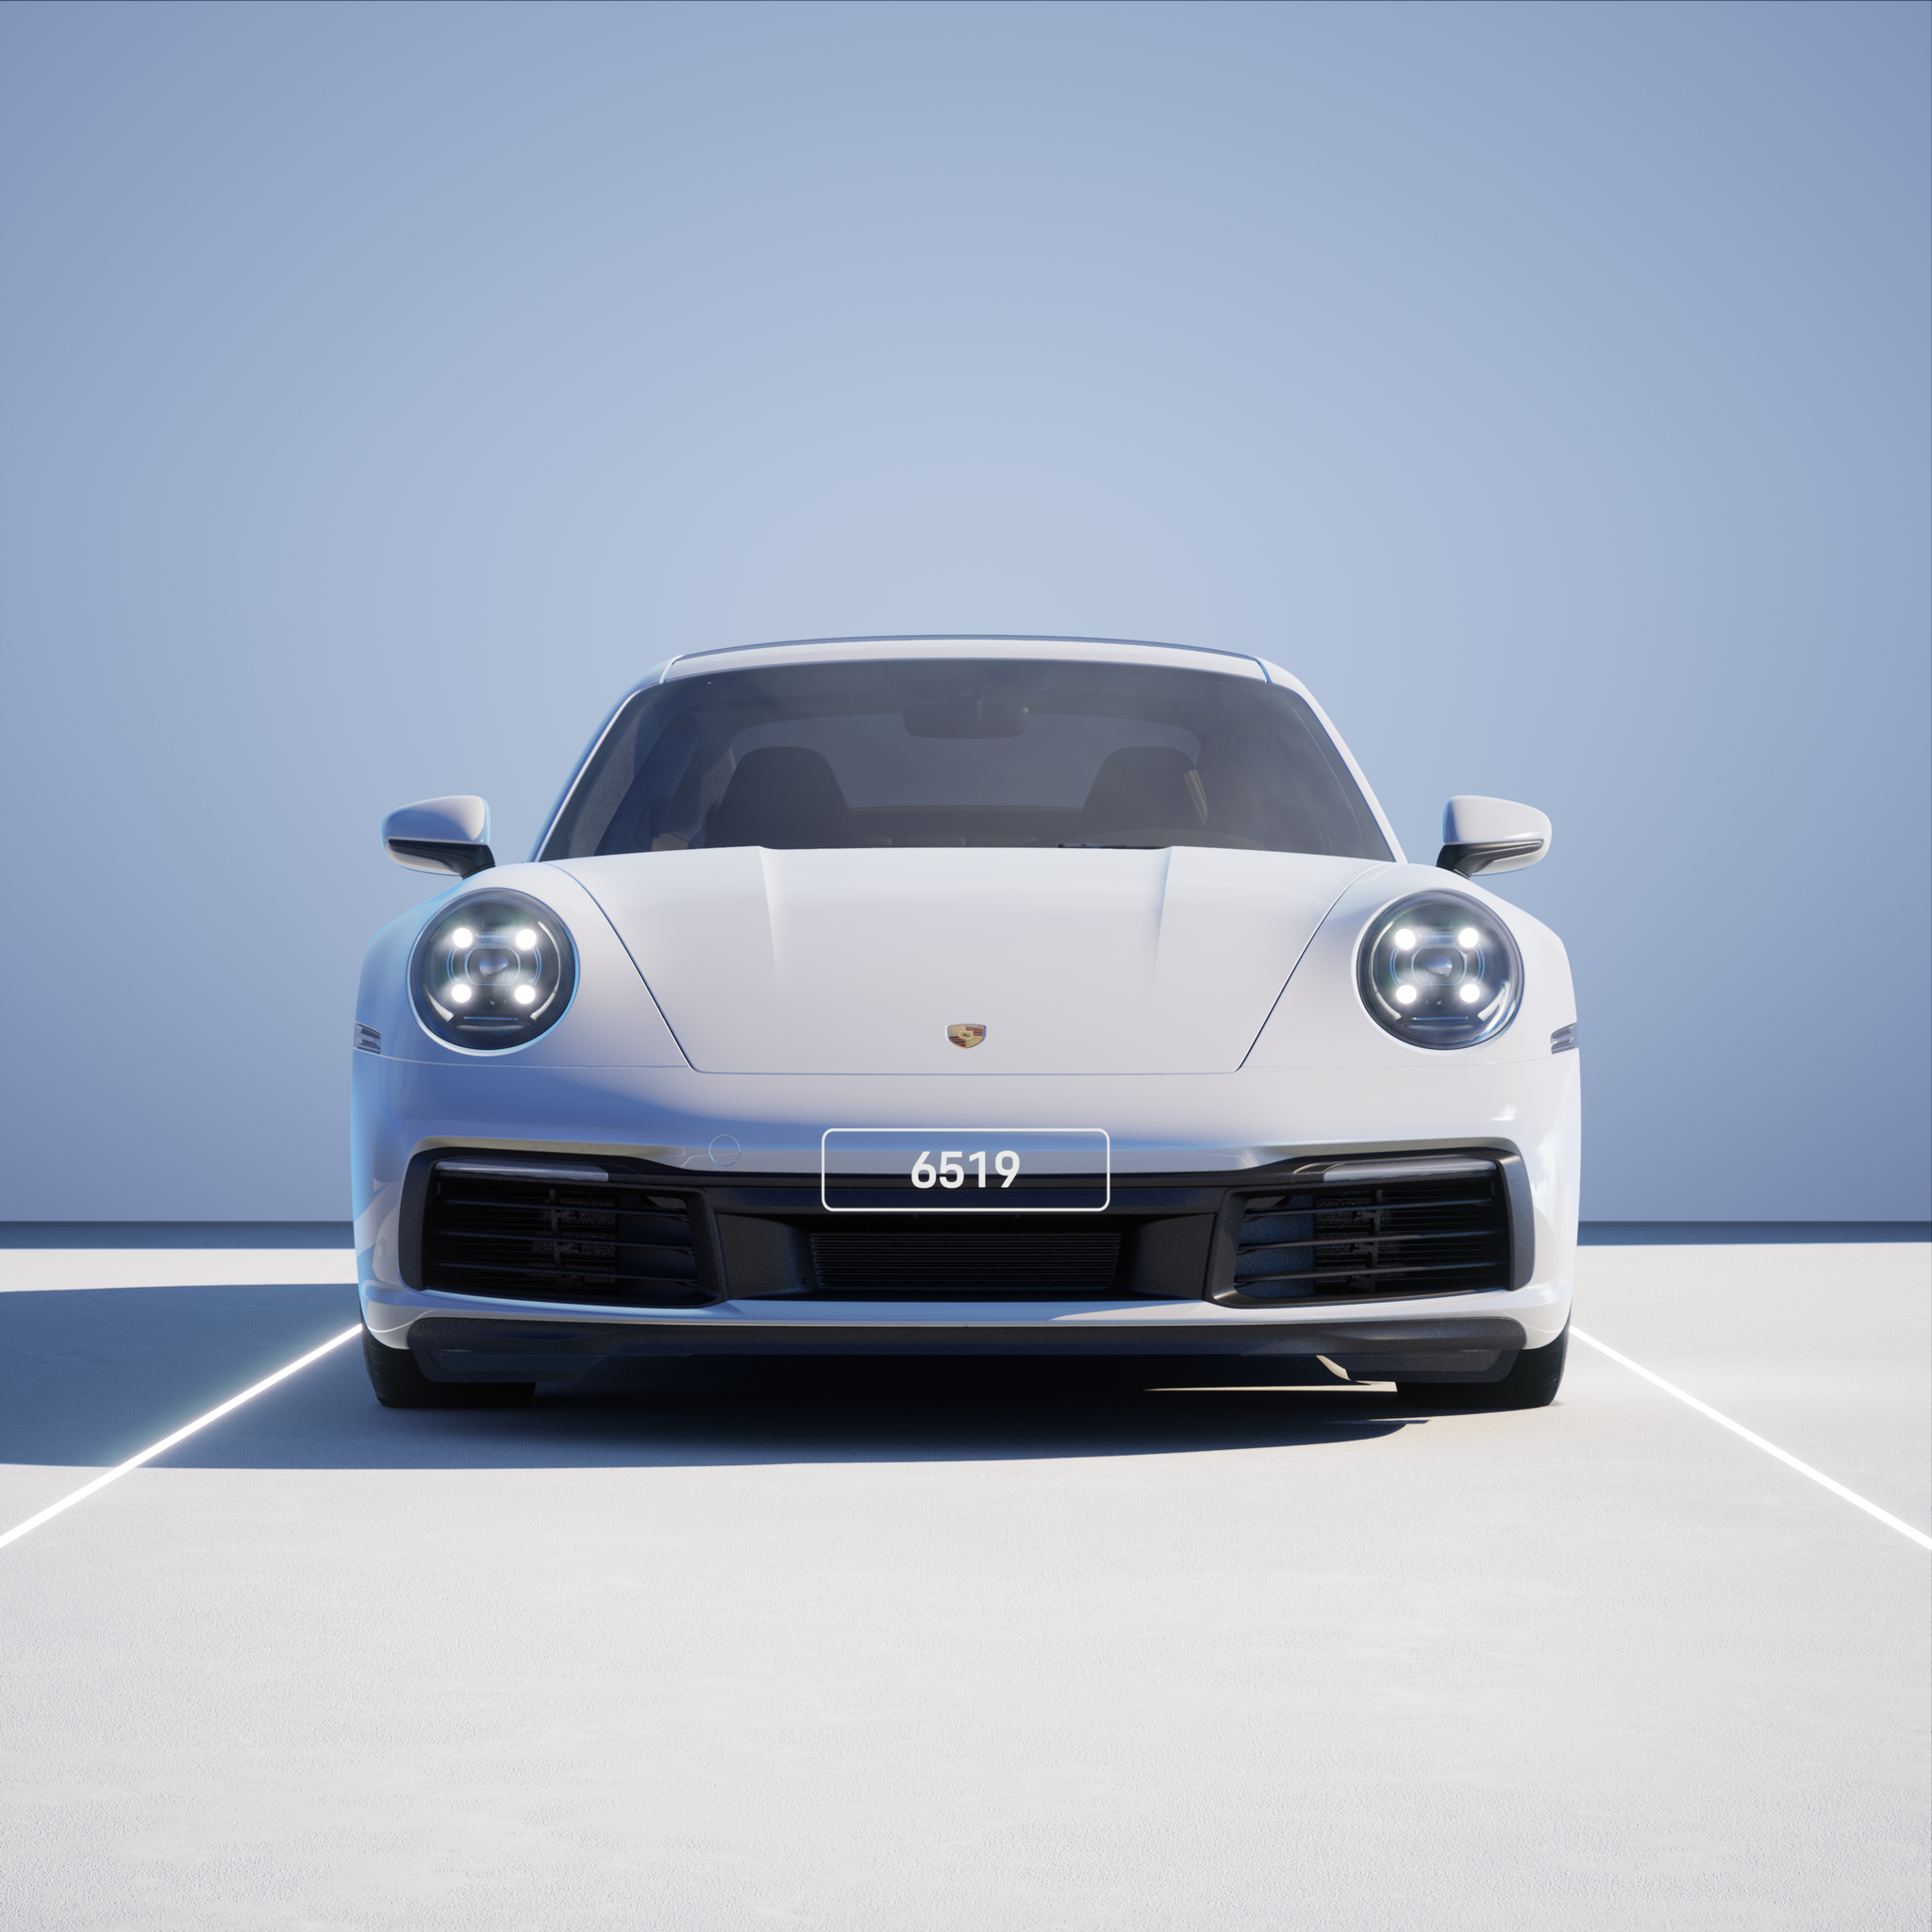 The PORSCHΞ 911 6519 image in phase